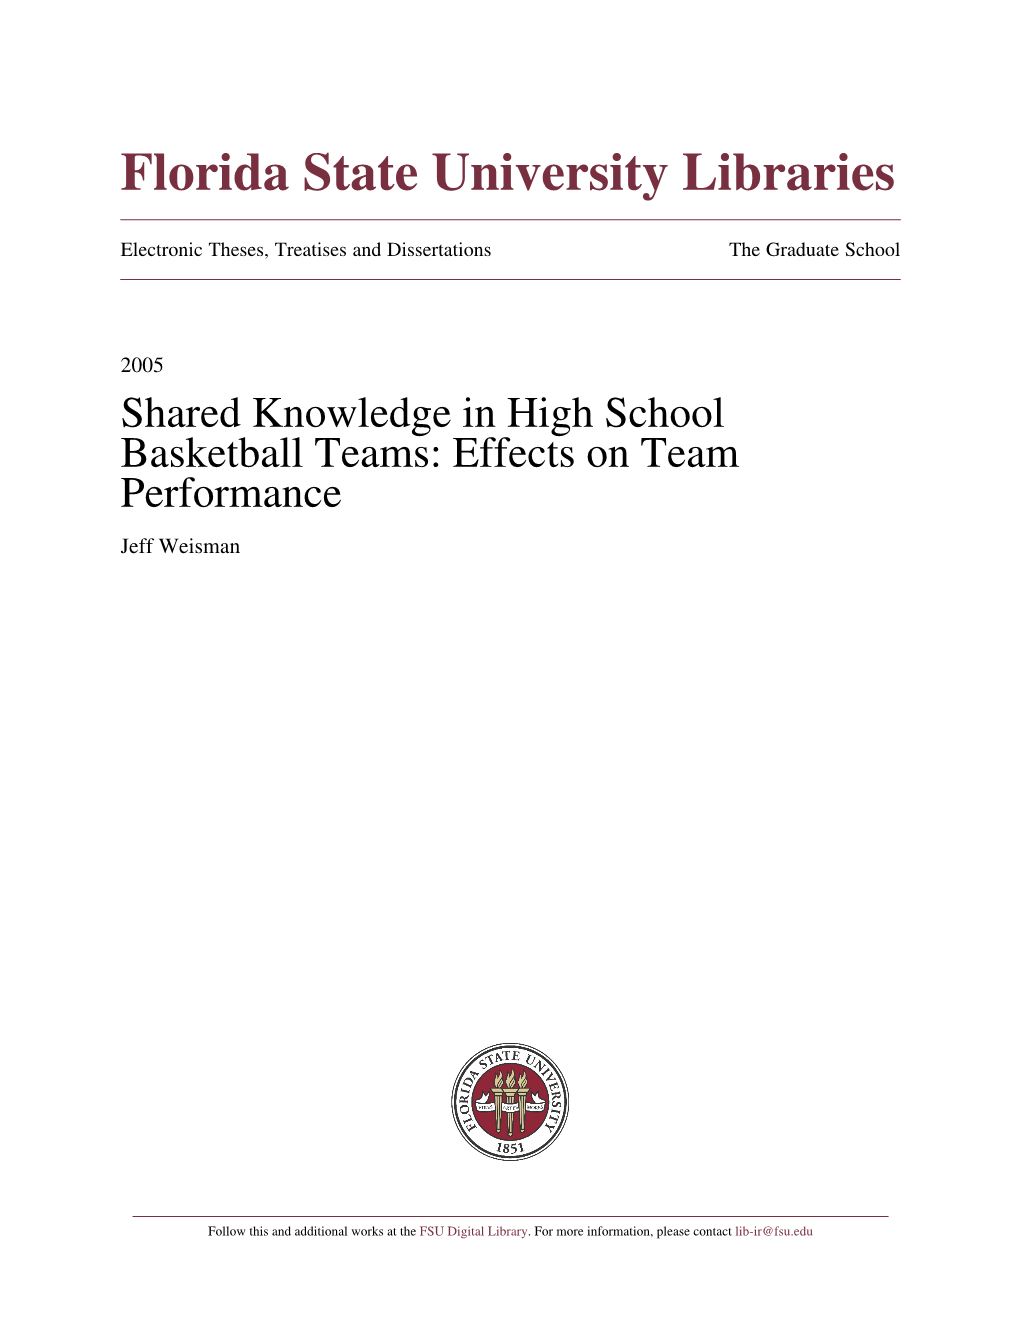 Shared Knowledge in High School Basketball Teams: Effects on Team Performance Jeff Weisman